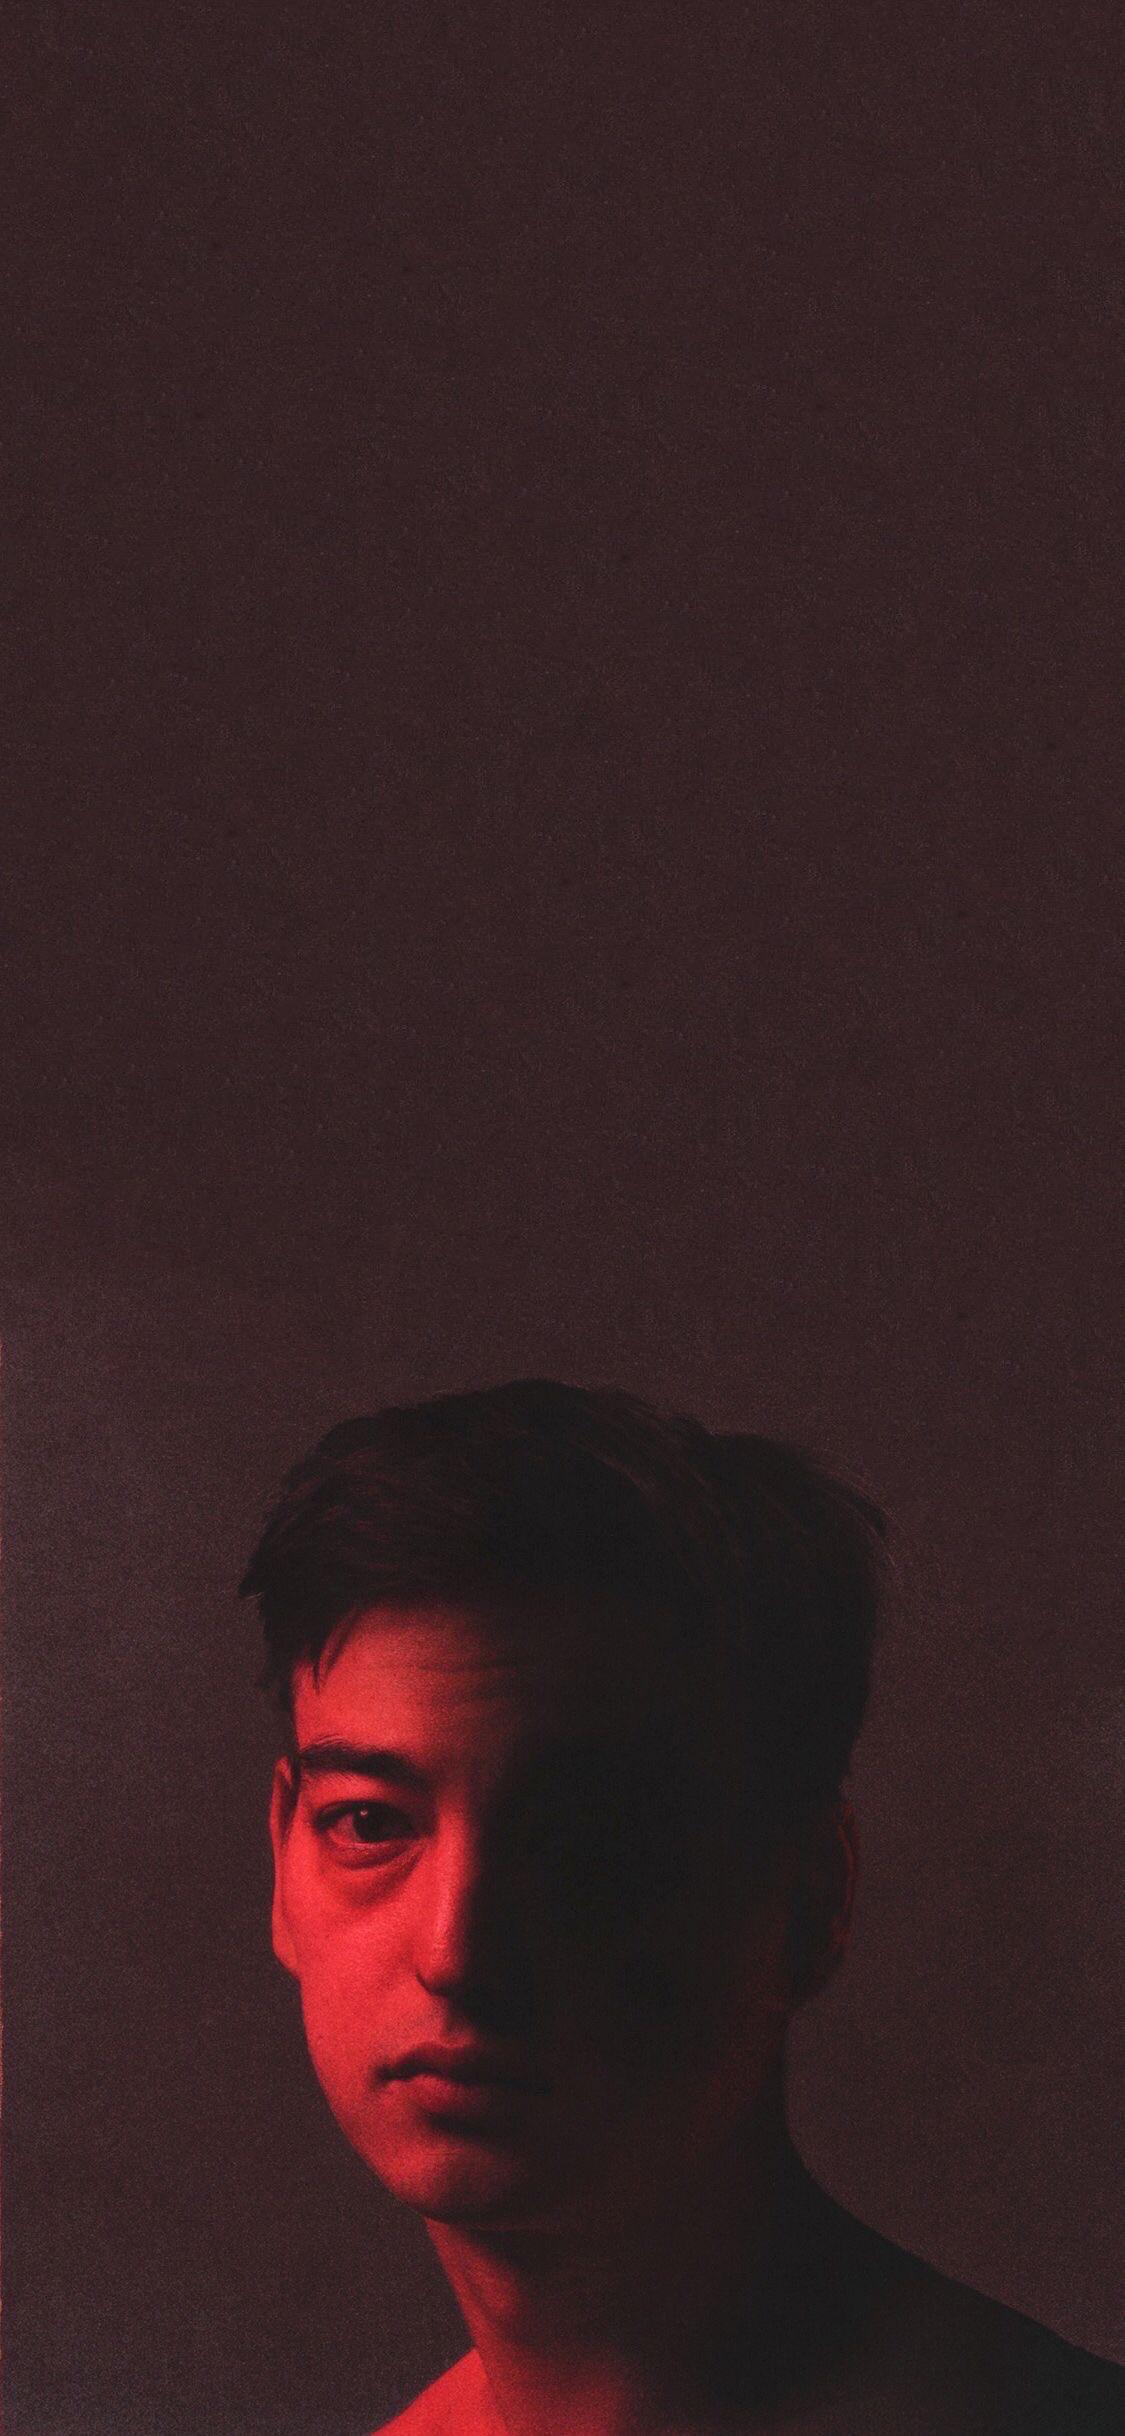 A joji wallpaper I made from slow dancing in the dark 2560x1440   rphonewallpapers